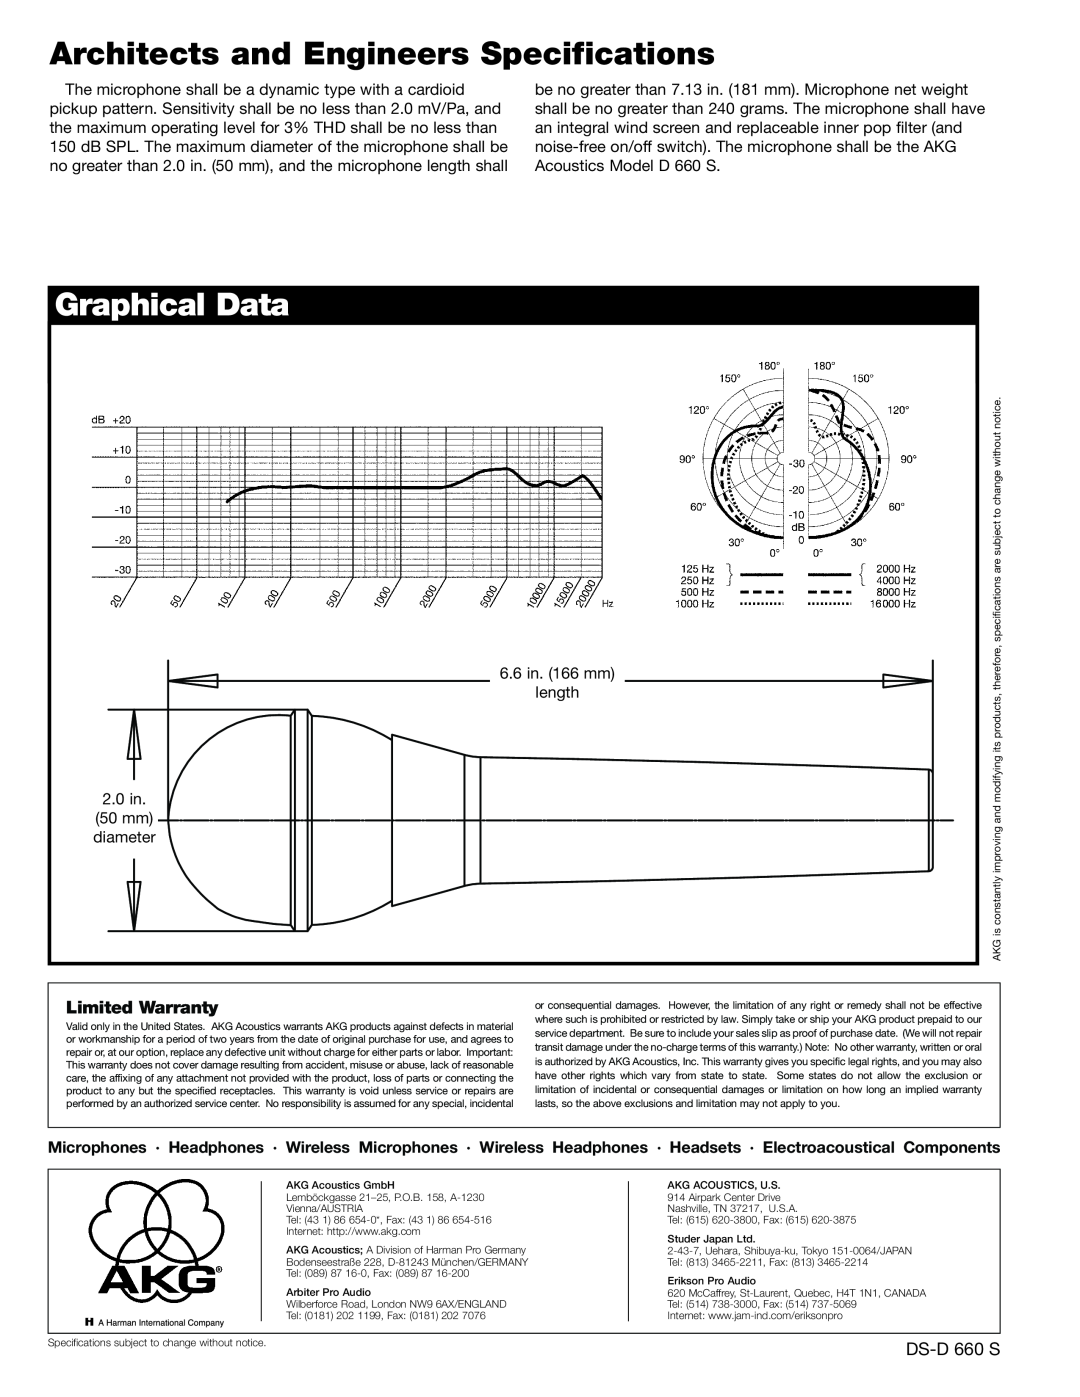 AKG Acoustics D660S Architects and Engineers Specifications, Graphical Data, Limited Warranty, DS-D660 S, 6.6 in. 166 mm 